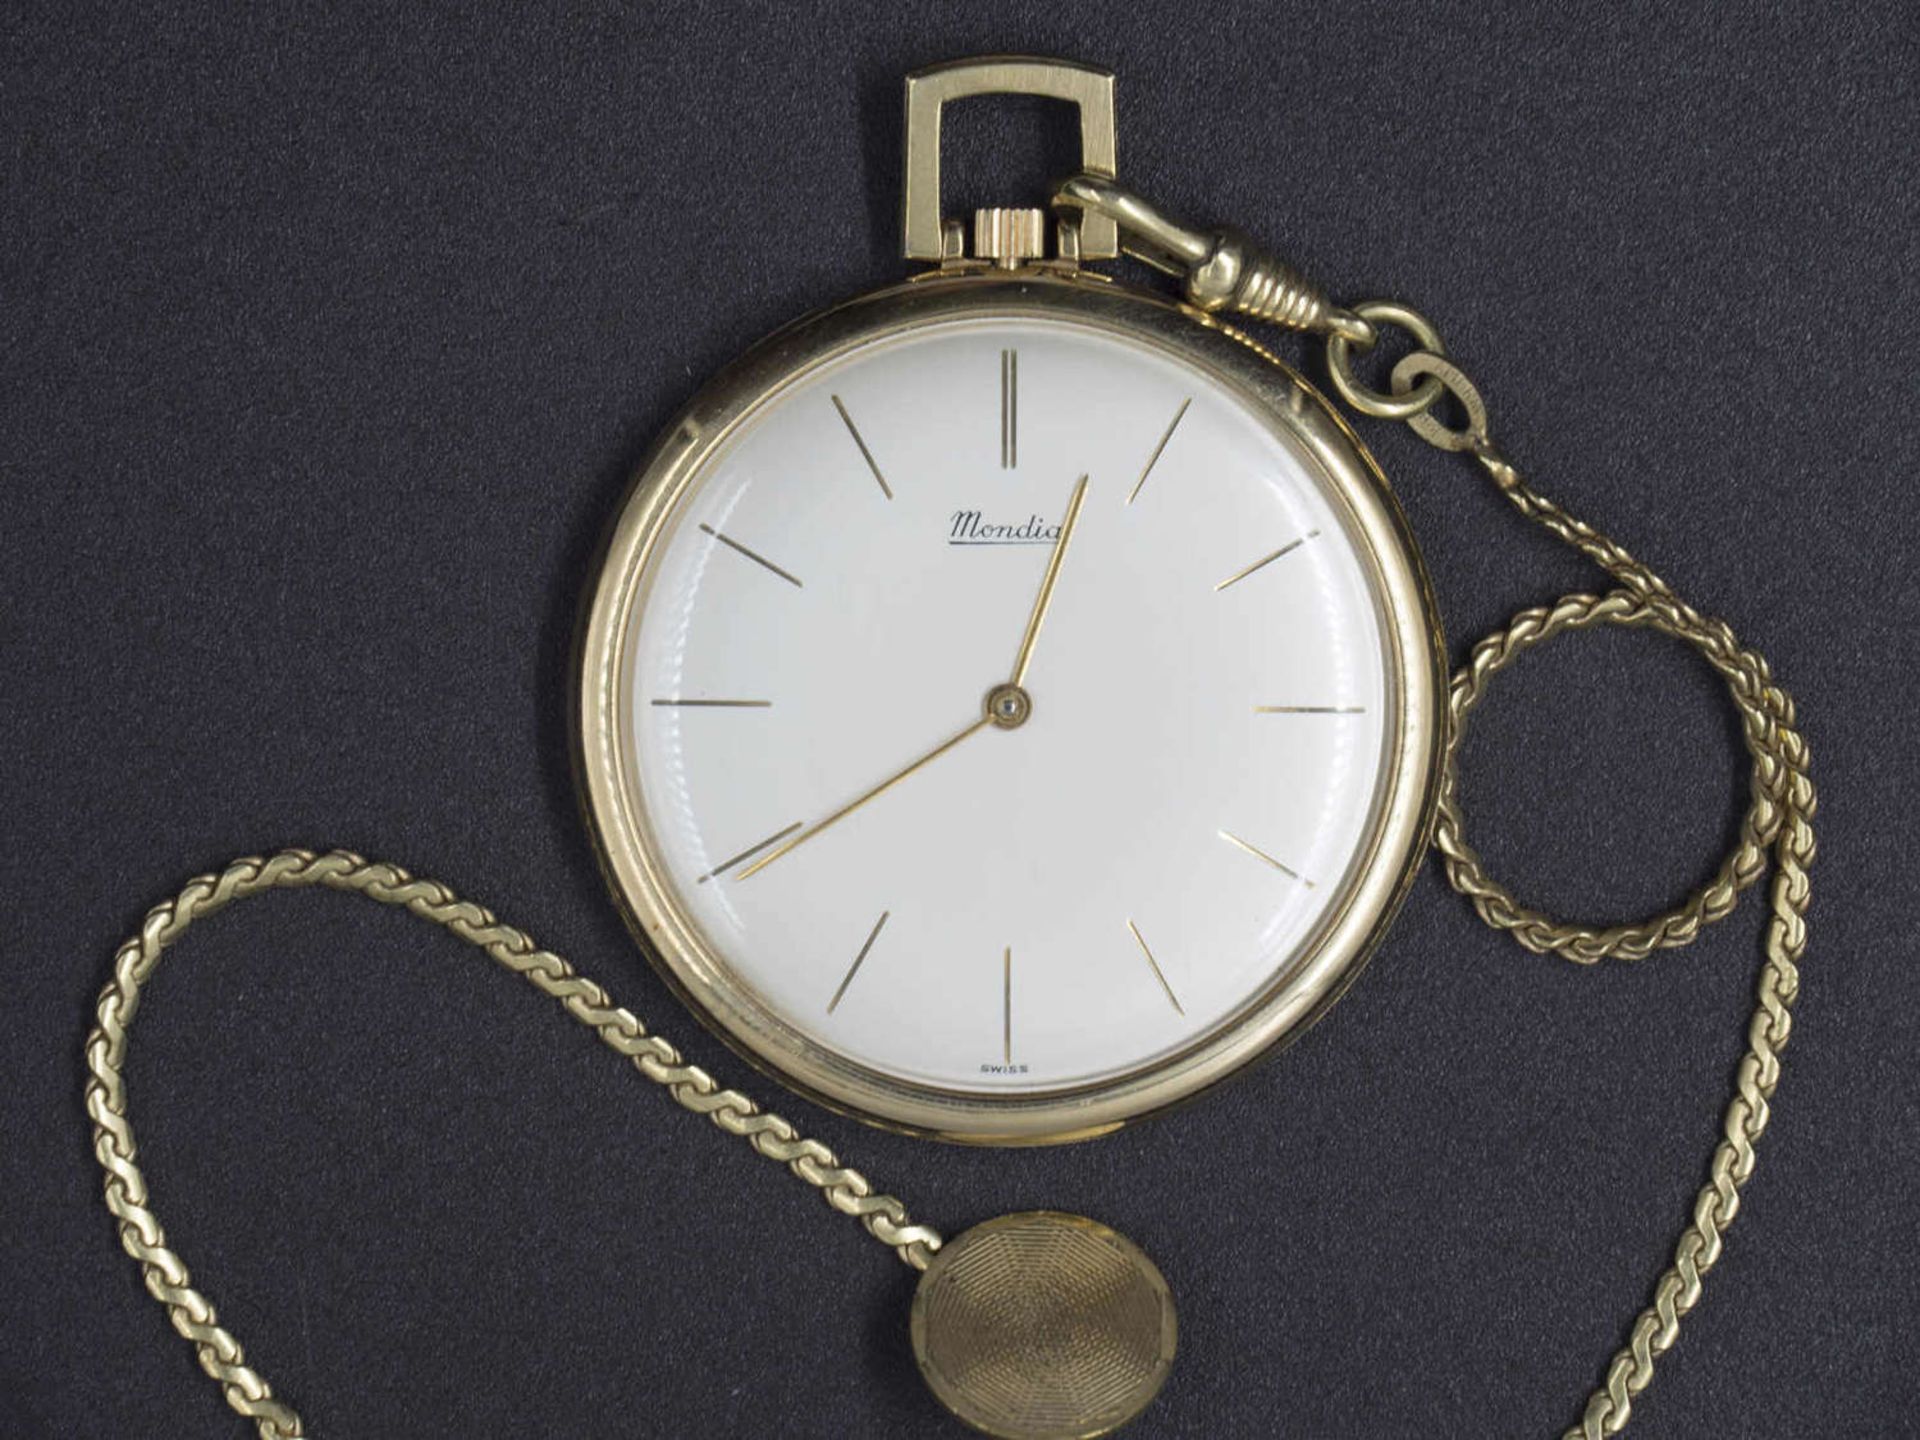 Mondia Swiss dress watch. Manual winding. Gilded. With watch chain, gilded. The clock starts.